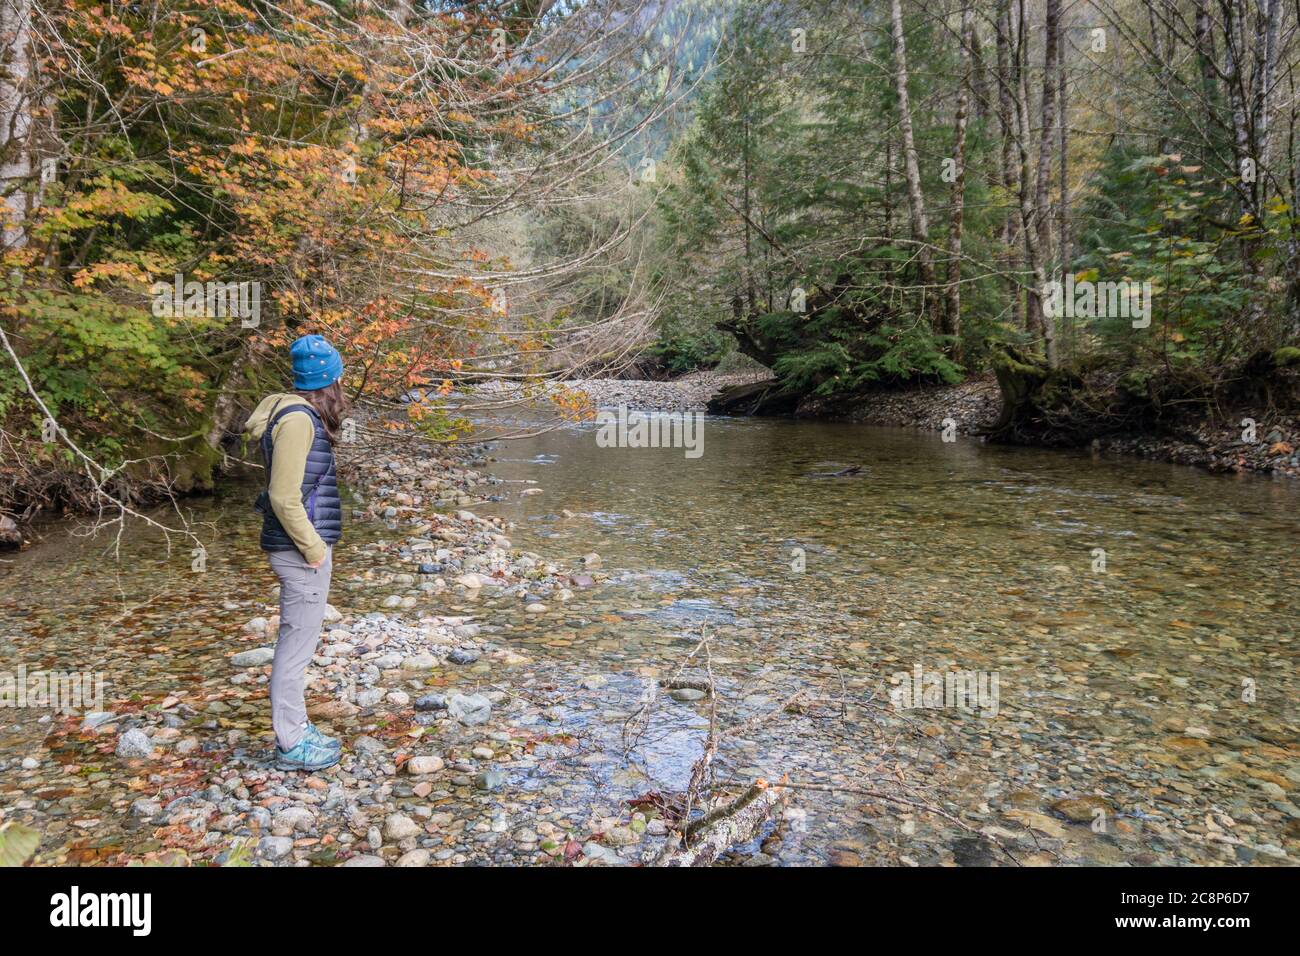 Squamish, BC/Canada-October 5, 2019: Young woman istands by the side of a river during fall foliage season watching the salmon run. Stock Photo